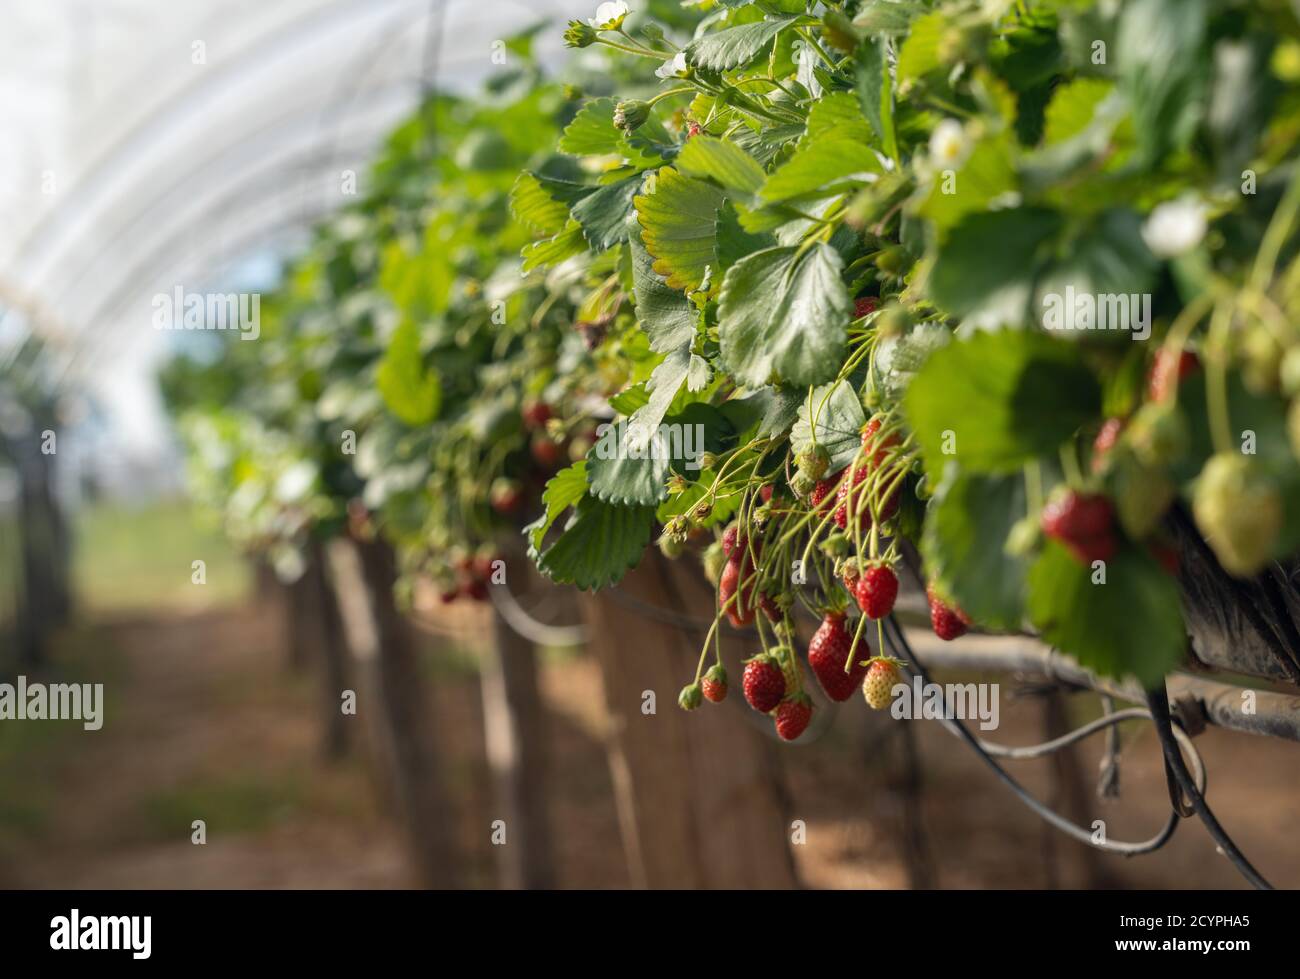 Ripe red strawberries in greenhouses Stock Photo